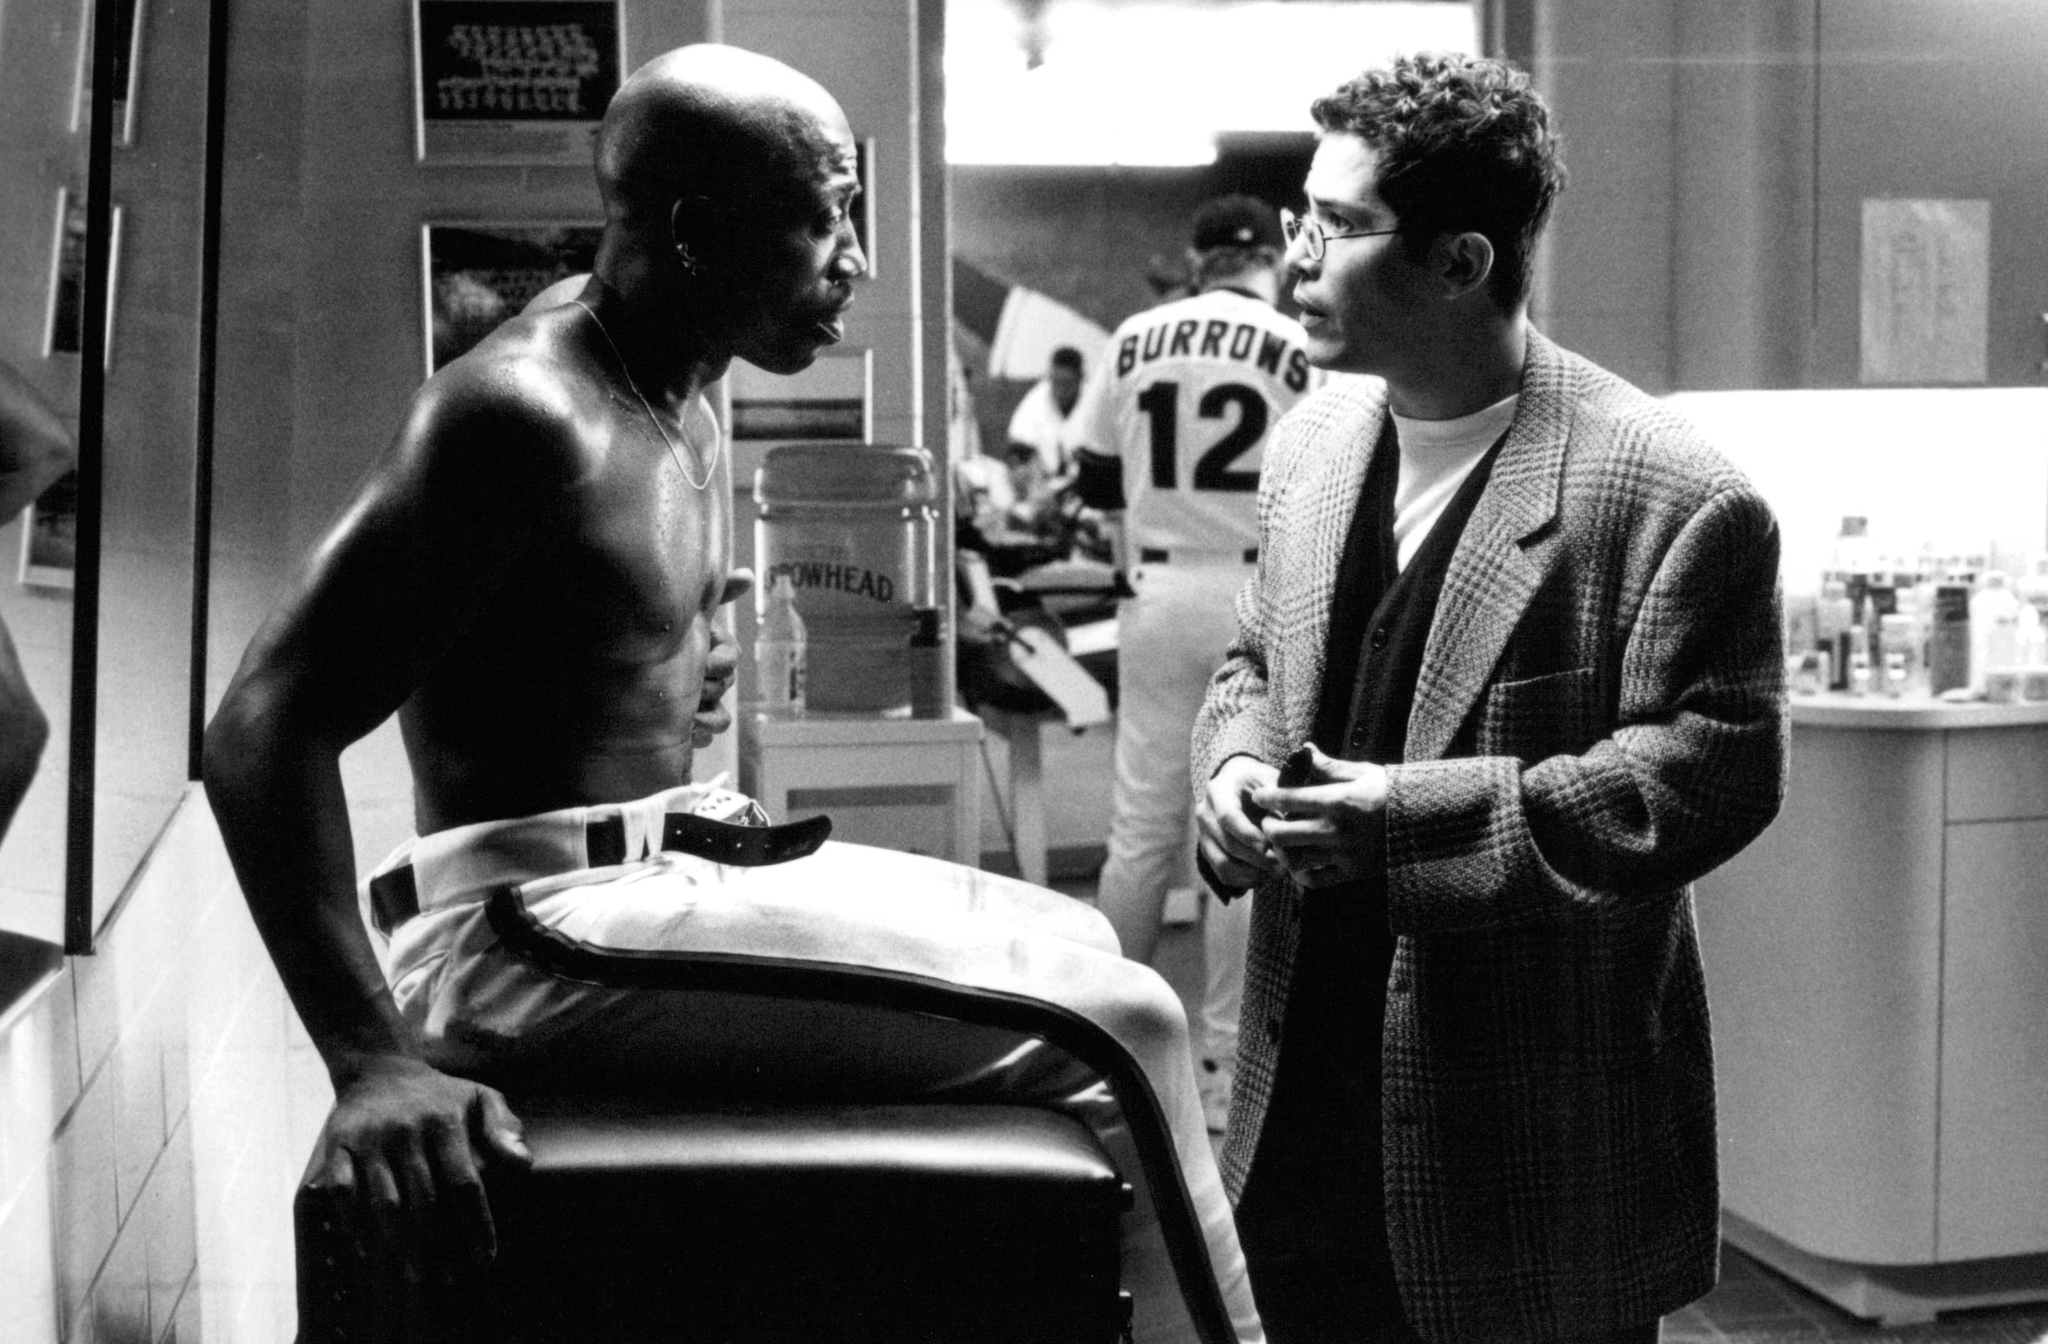 Still of John Leguizamo and Wesley Snipes in The Fan (1996)